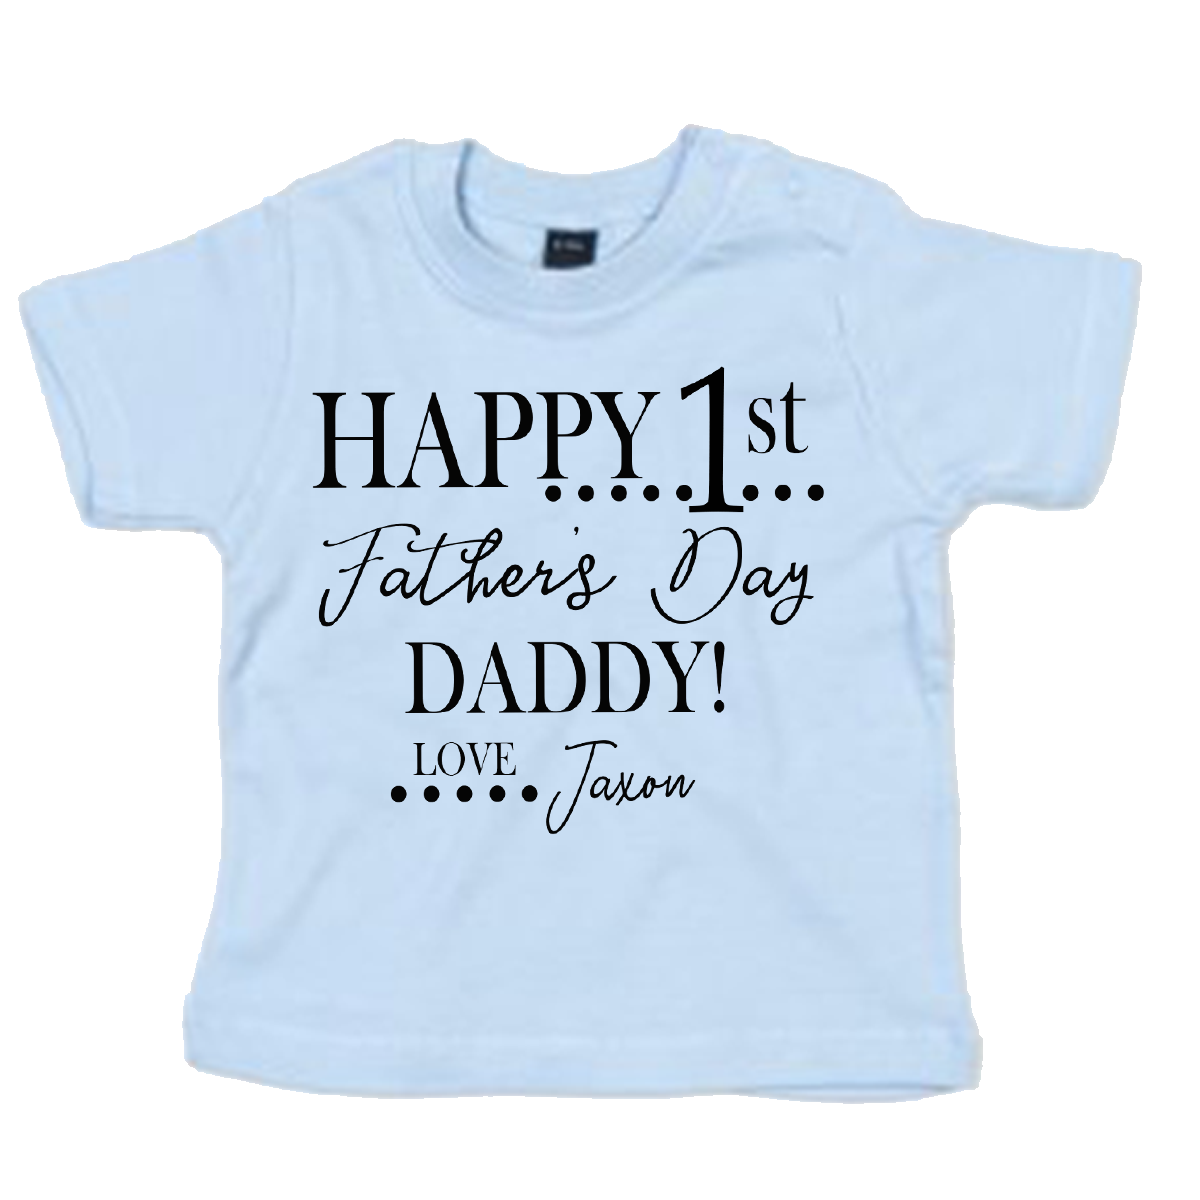 Happy 1st Father's Day Daddy - Personalised baby t-shirt